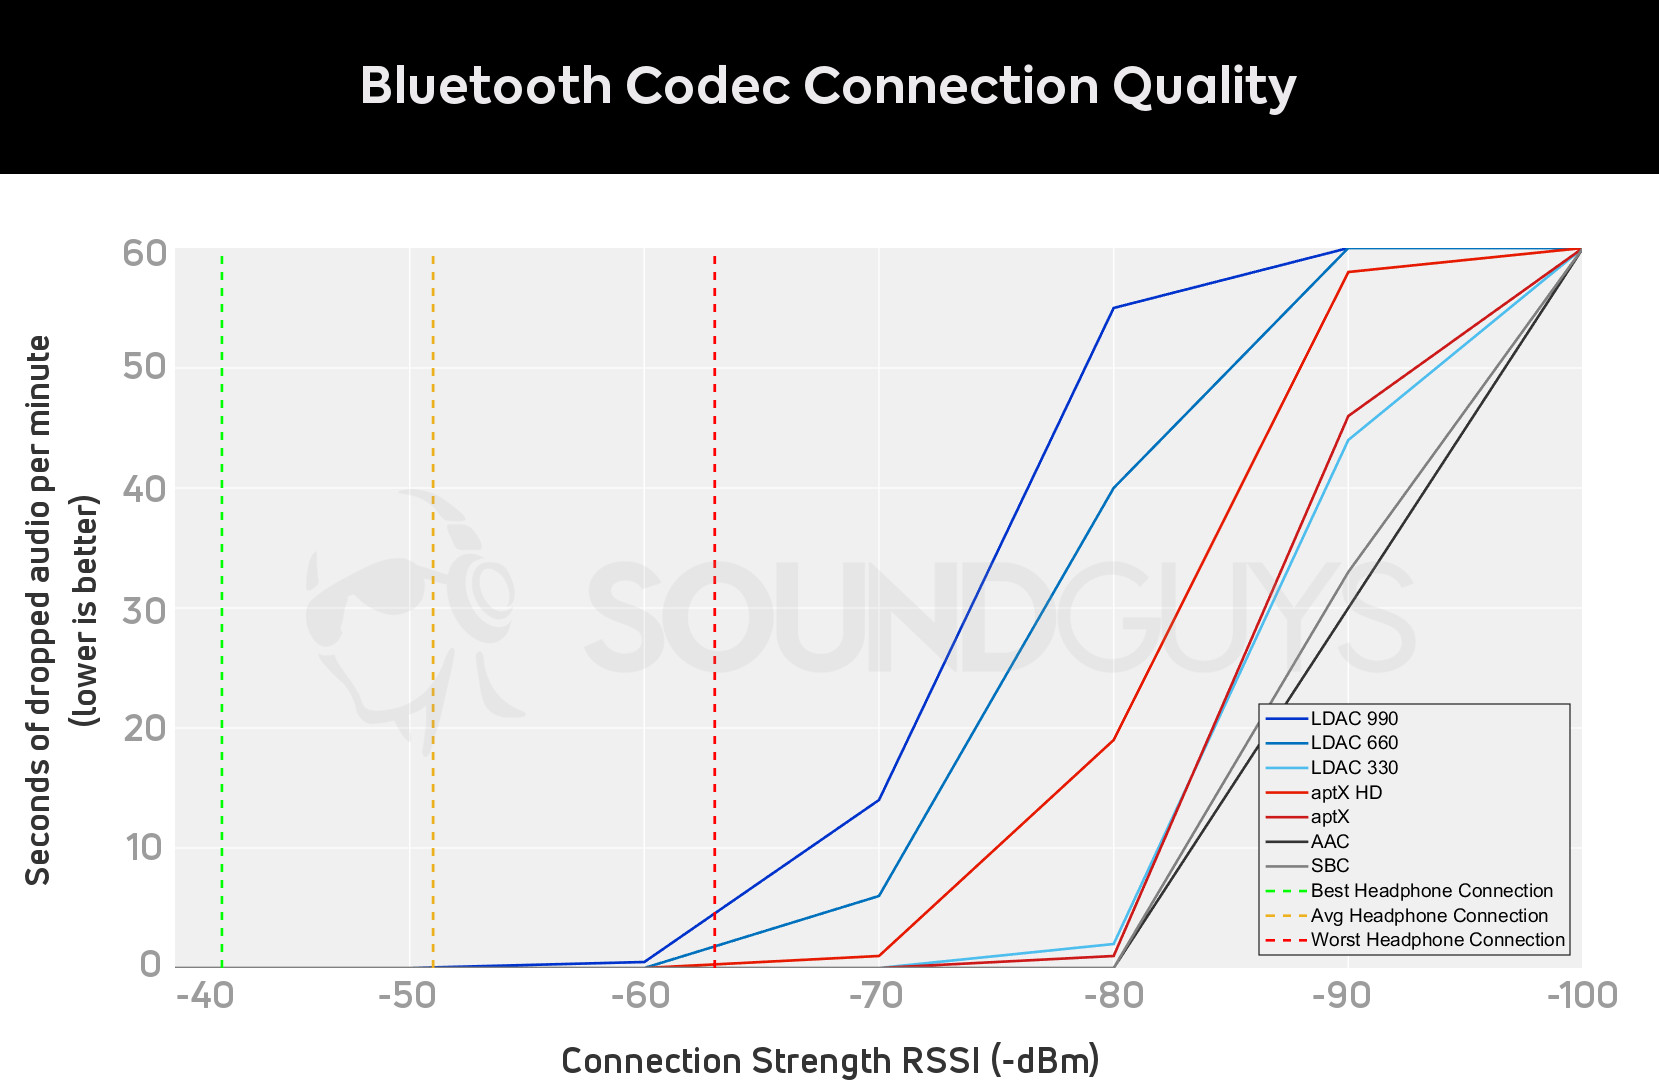 Graph of Bluetooth codec signal strength vs dropped seconds of audio